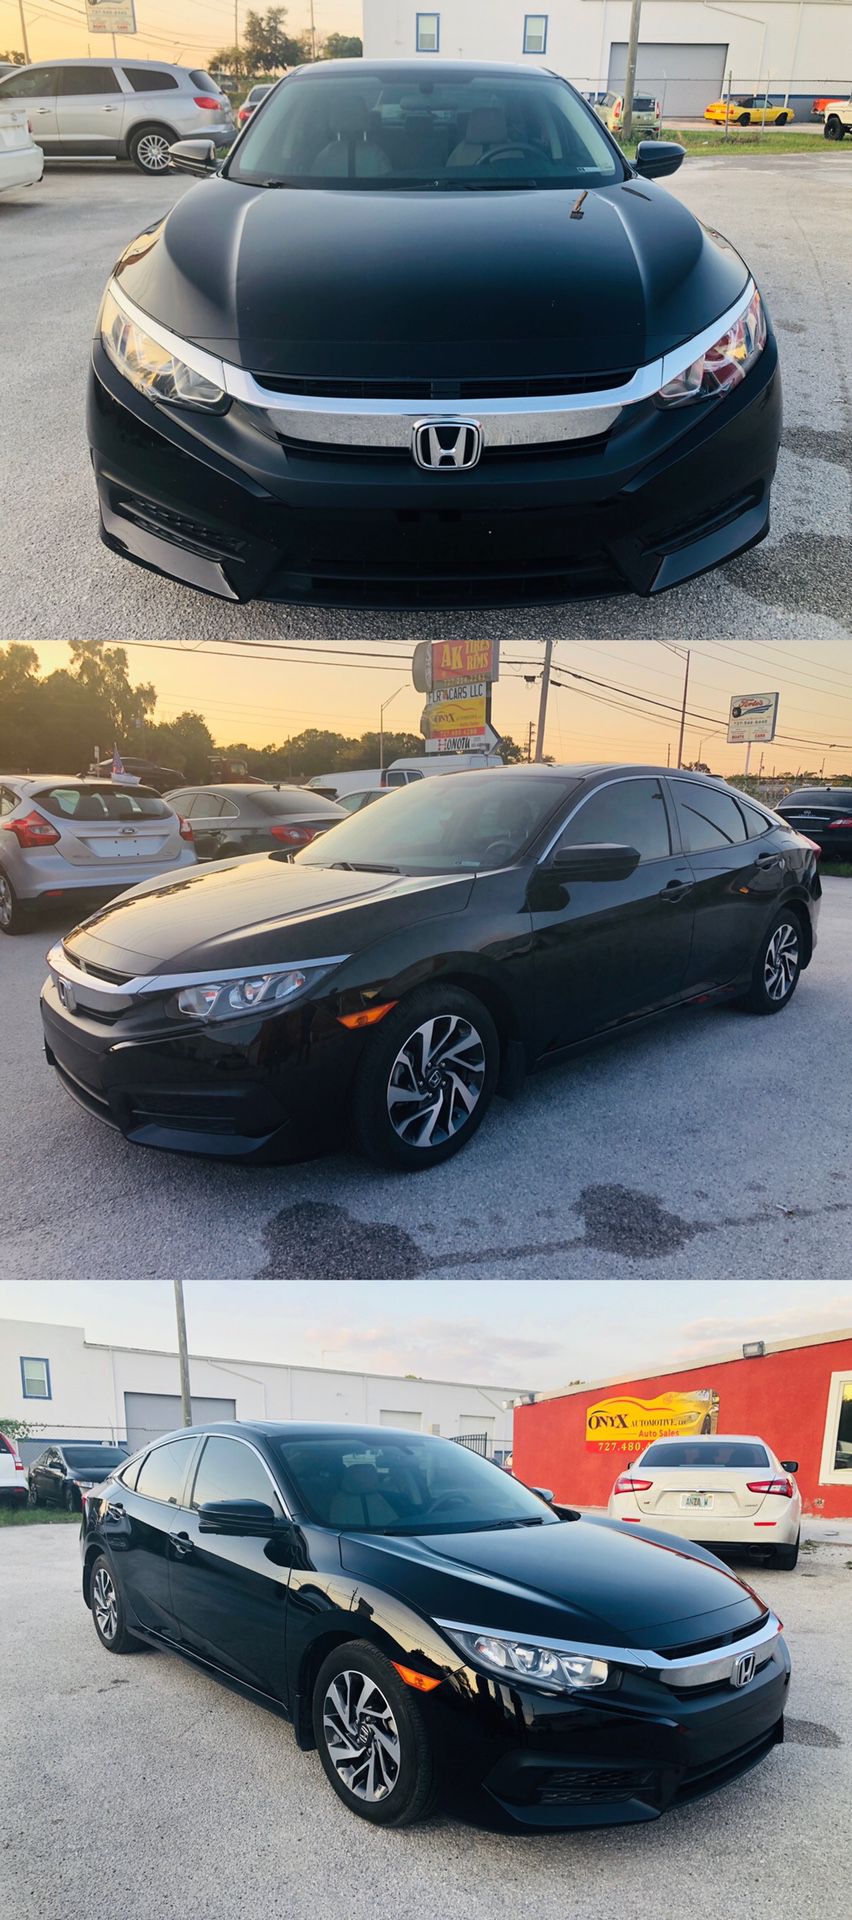 2018 Honda Civic EX 24k Miles $18k KBB factory Warranty perfect Trades Welcome Open 7 days